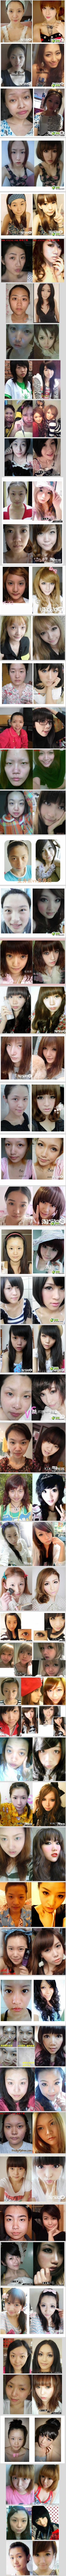 Asian Girls Before and After Makeup